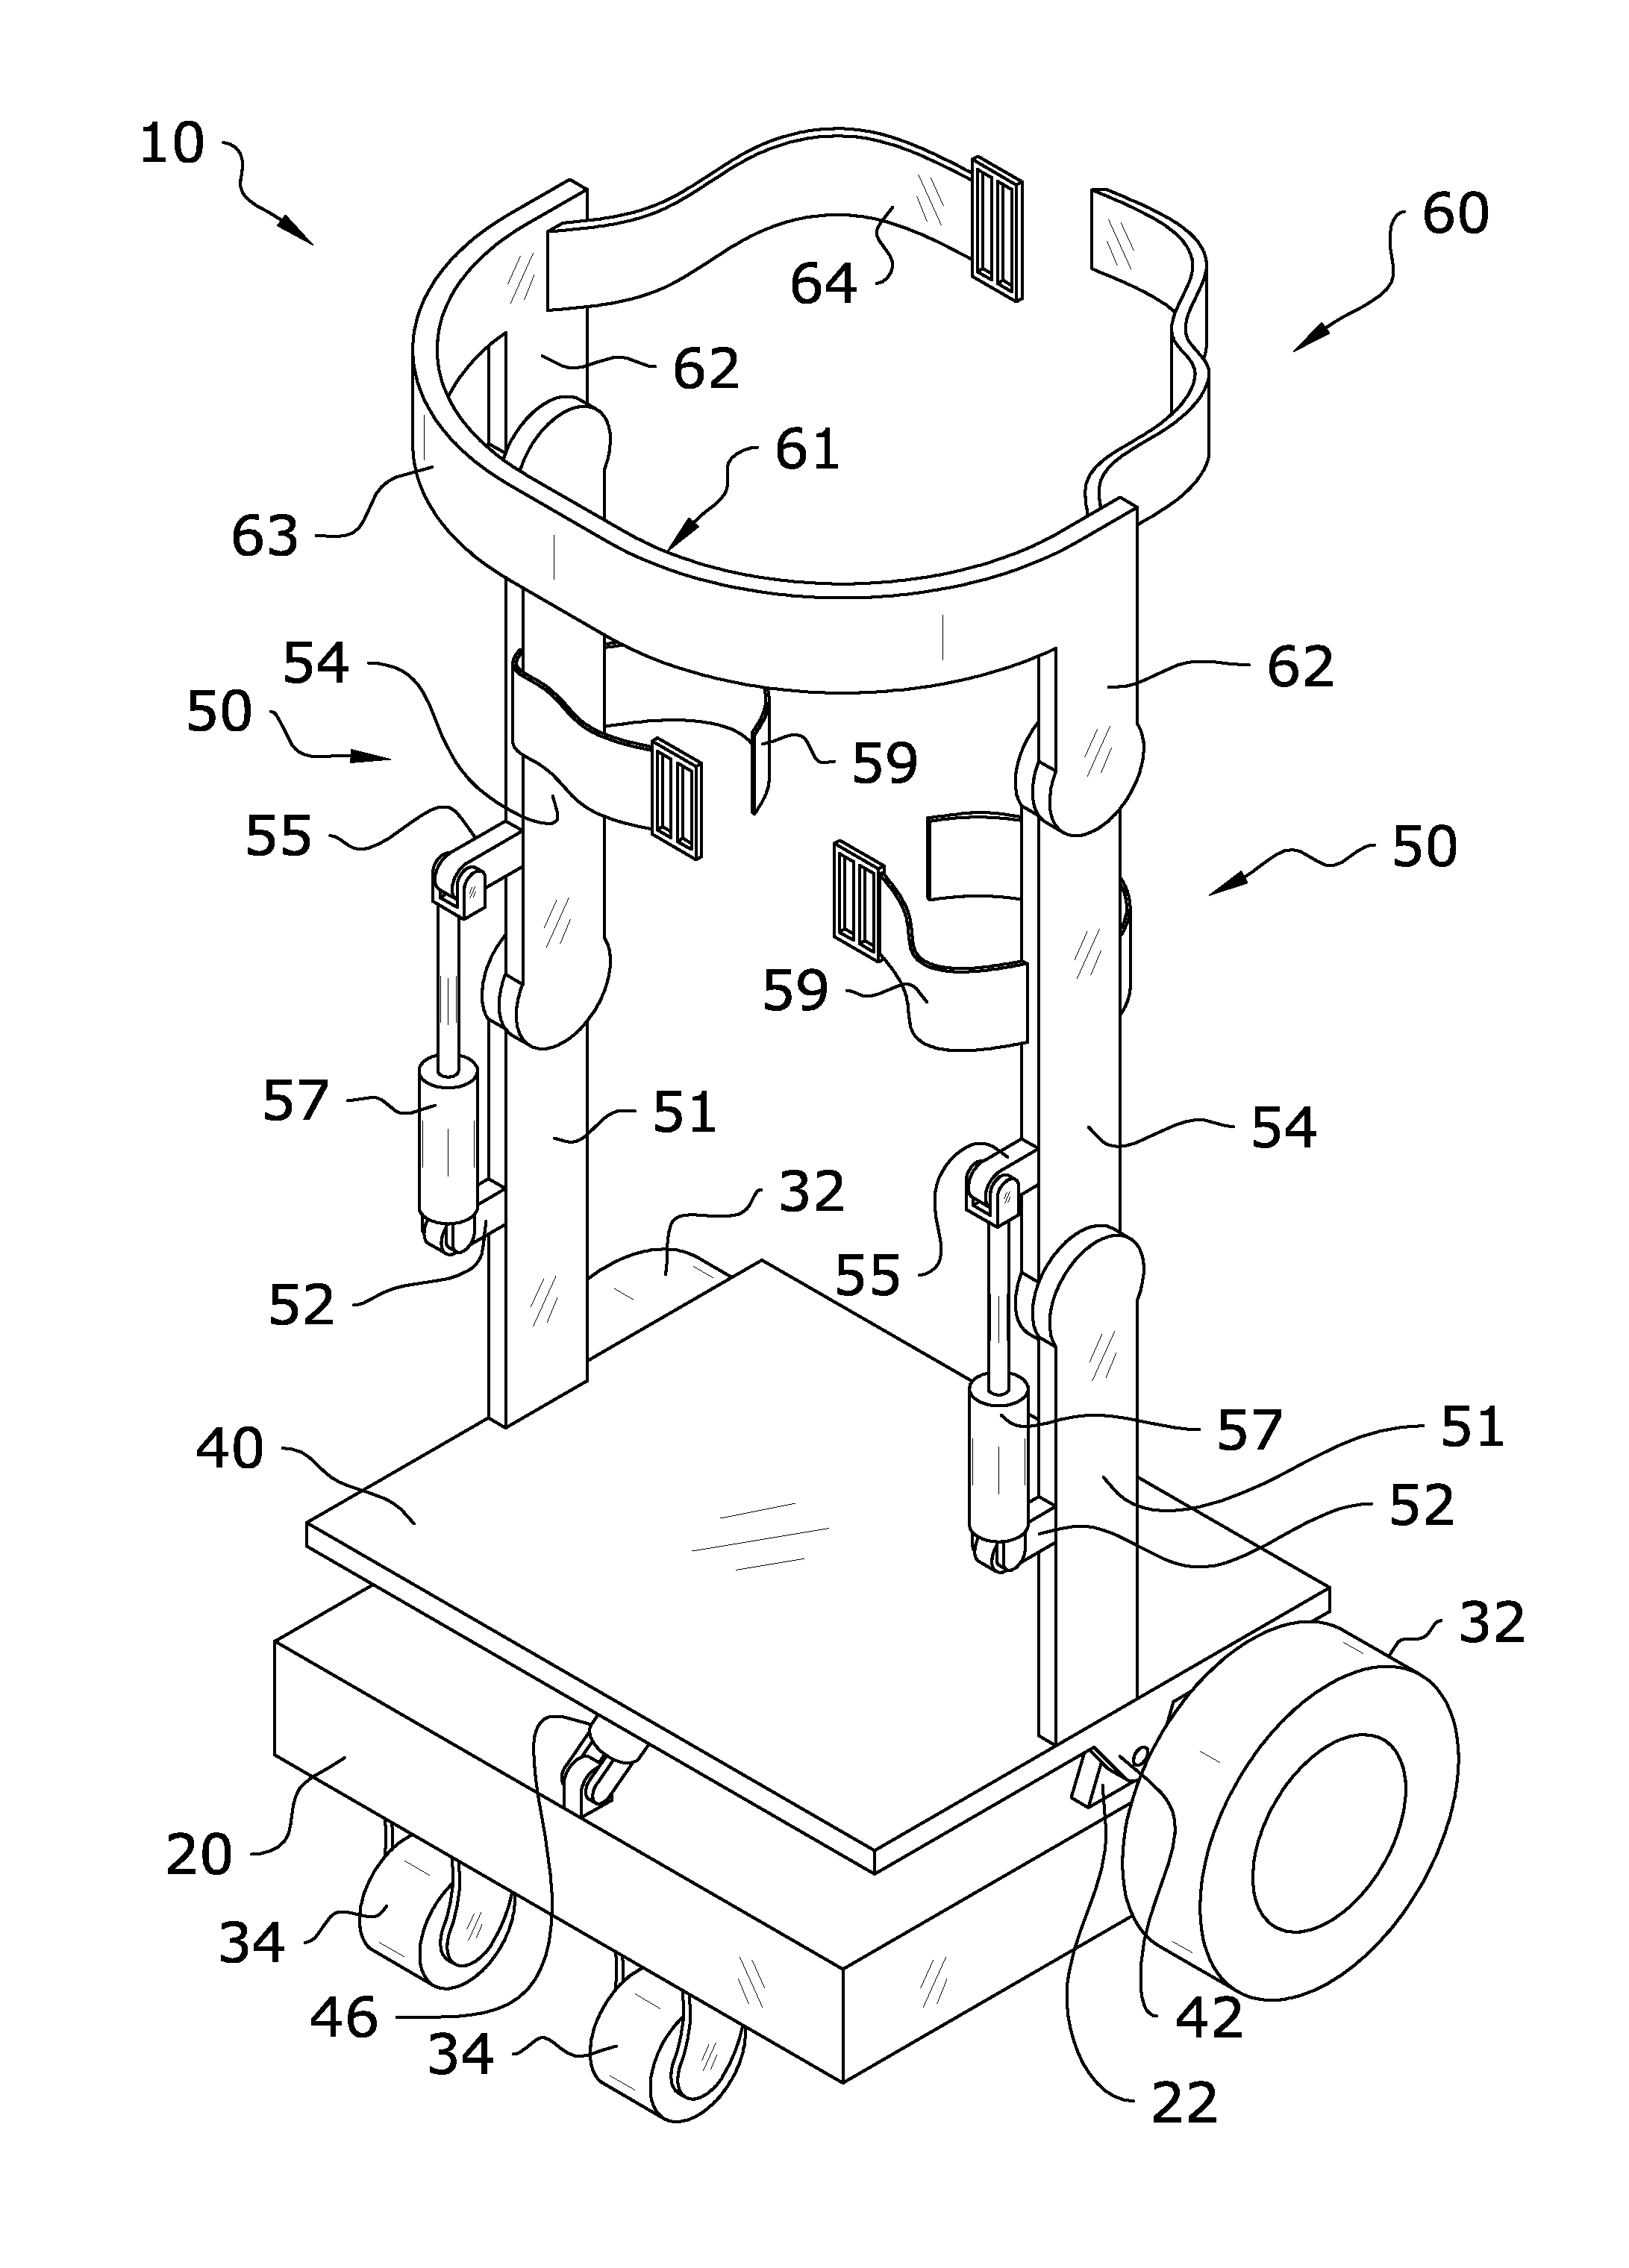 Mobile device for supporting a user in a standing, sitting, or kneeling position